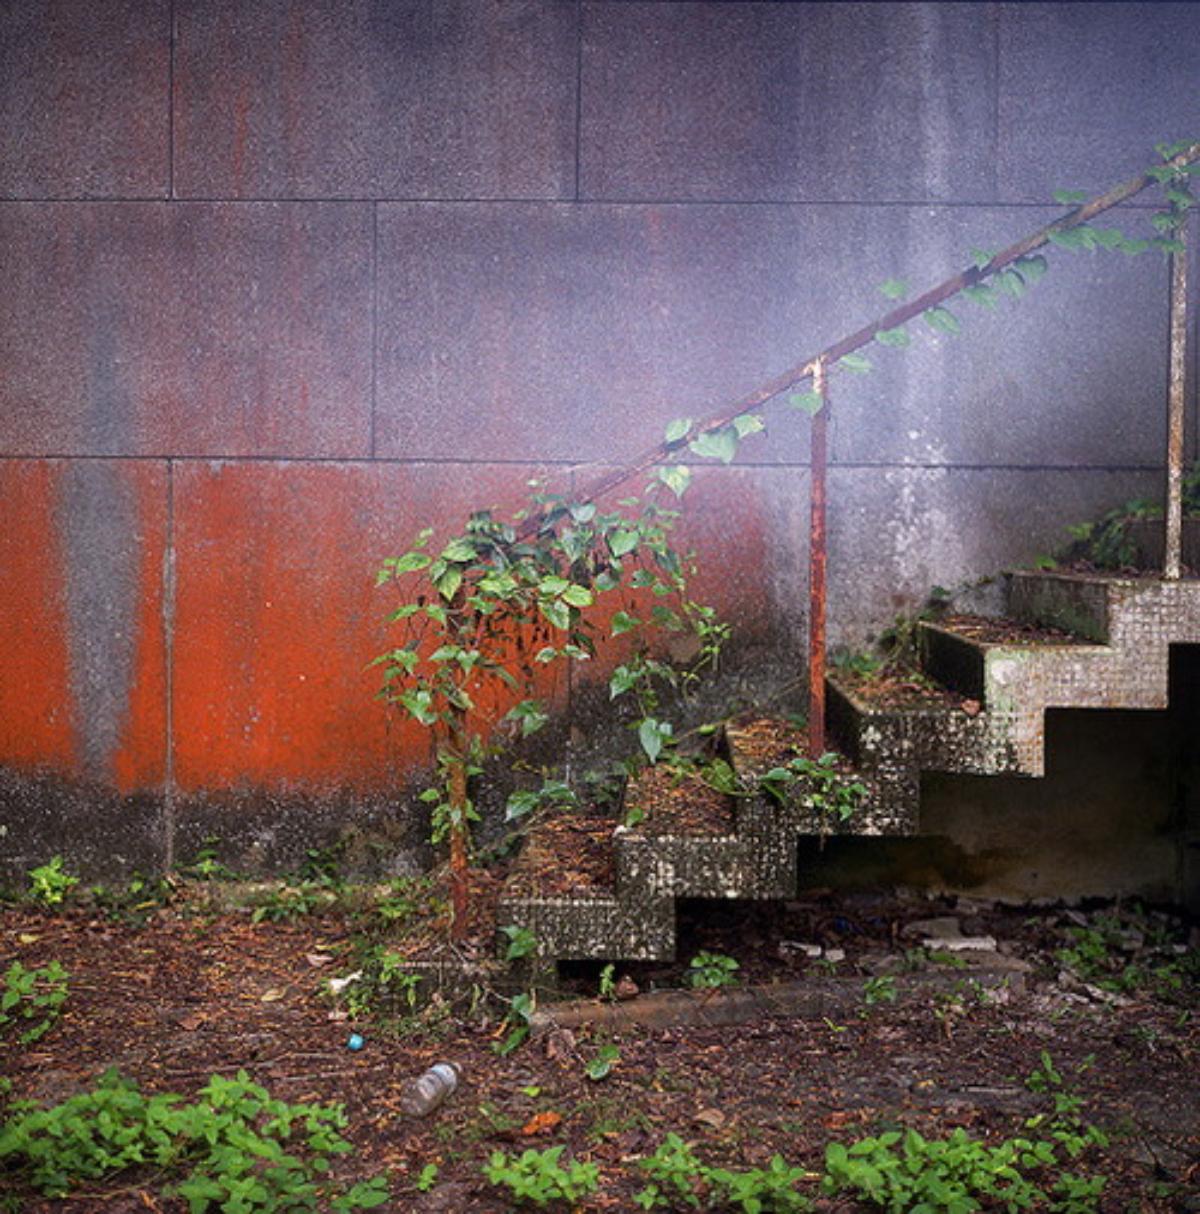 Urban Decay Photography